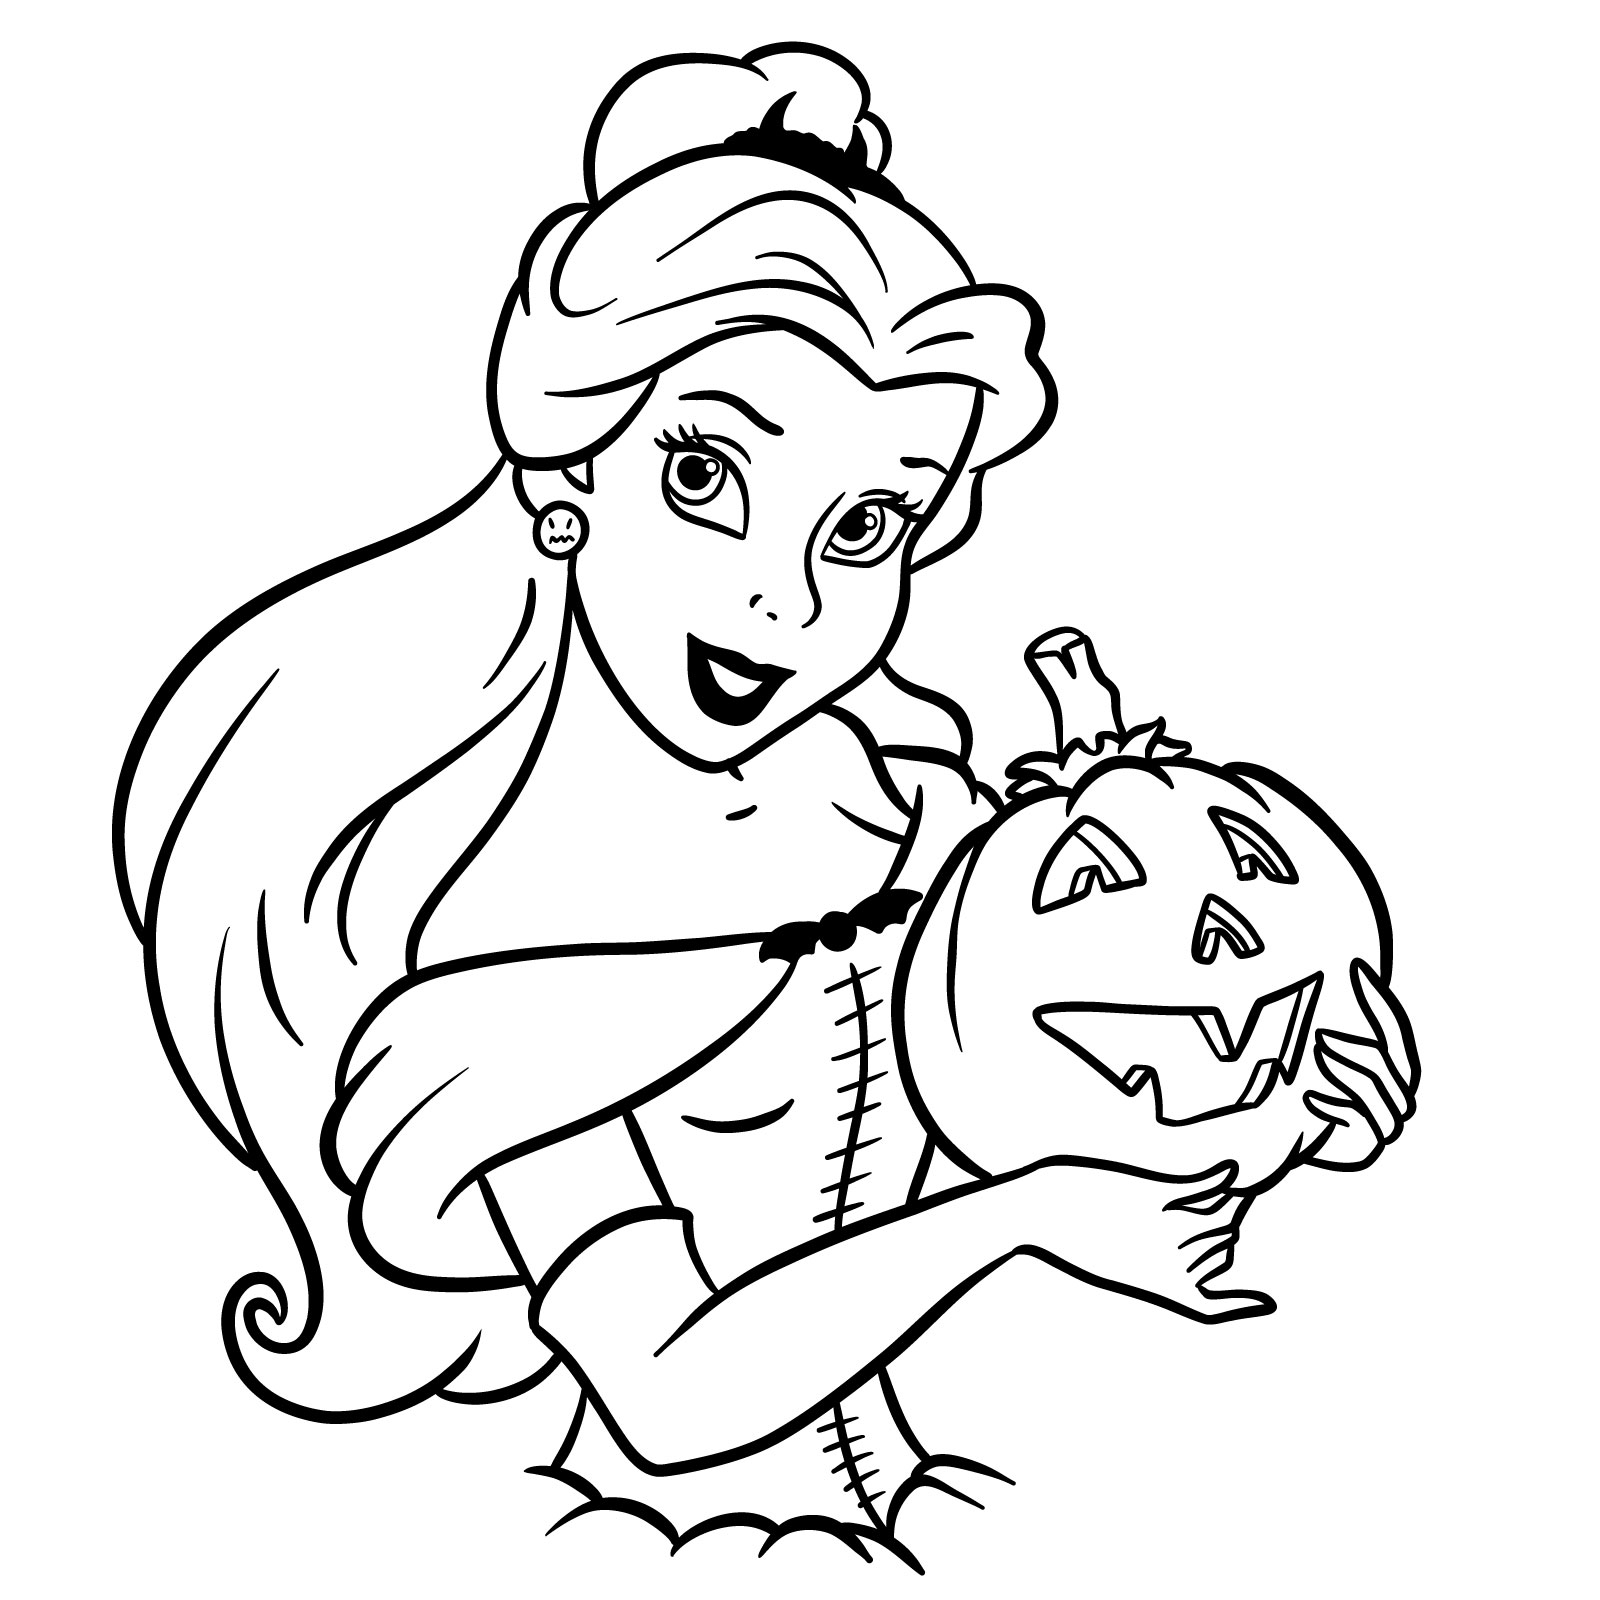 How to Draw Halloween Belle with a pumpkin - final step